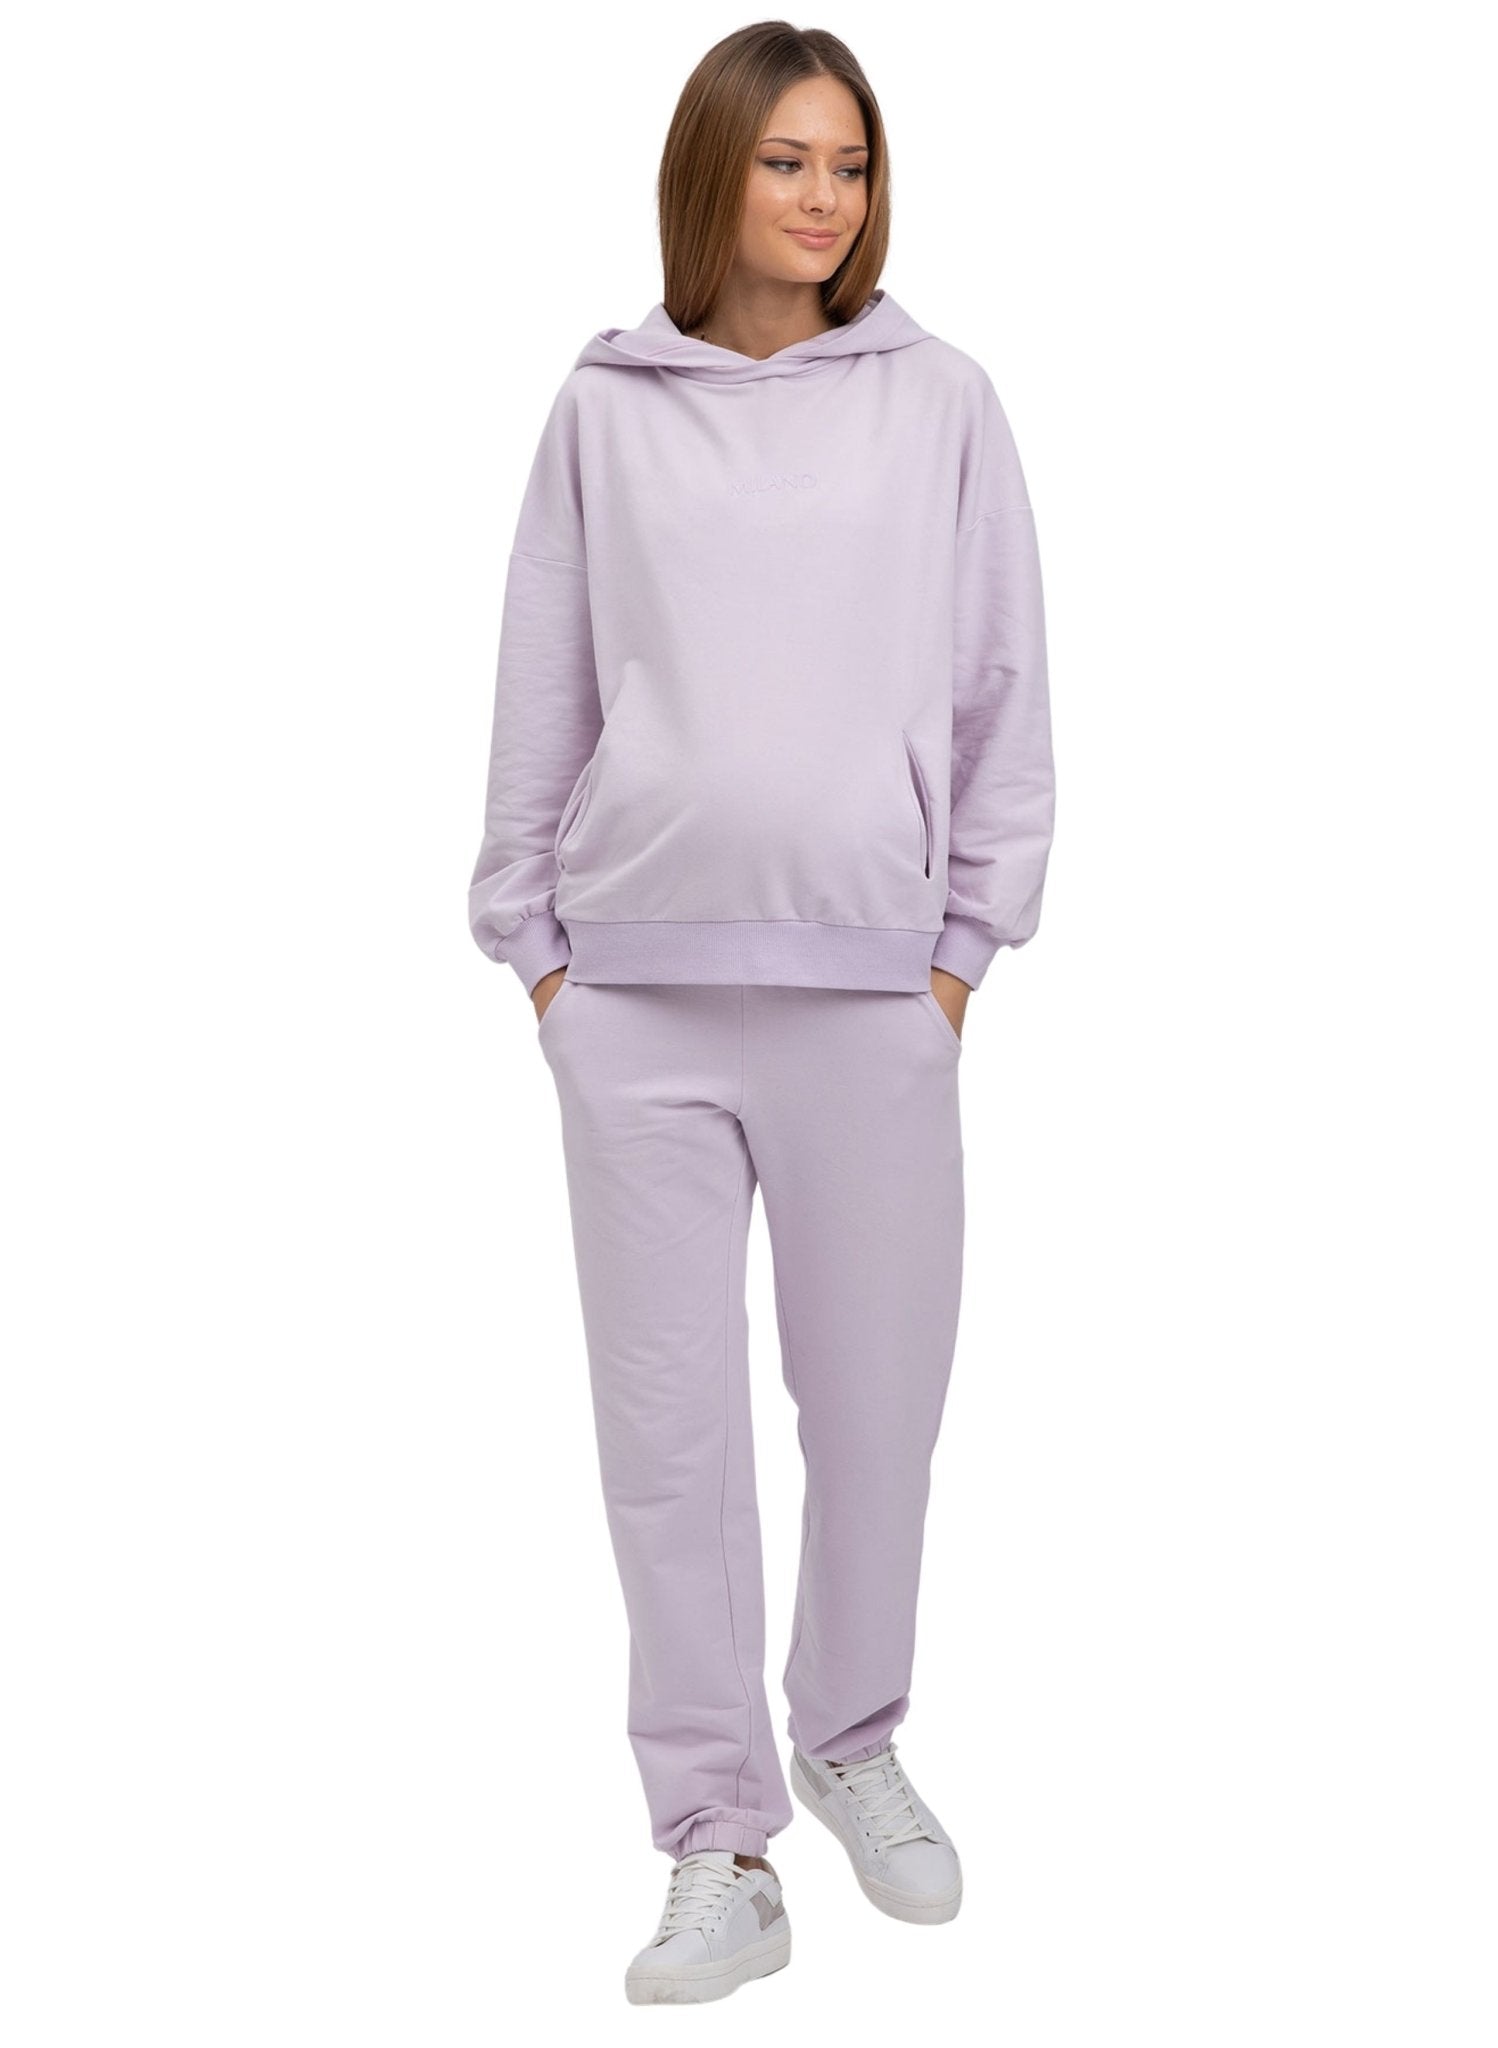 The Cozy Maternity Tracksuit - Glicine - Mums and Bumps